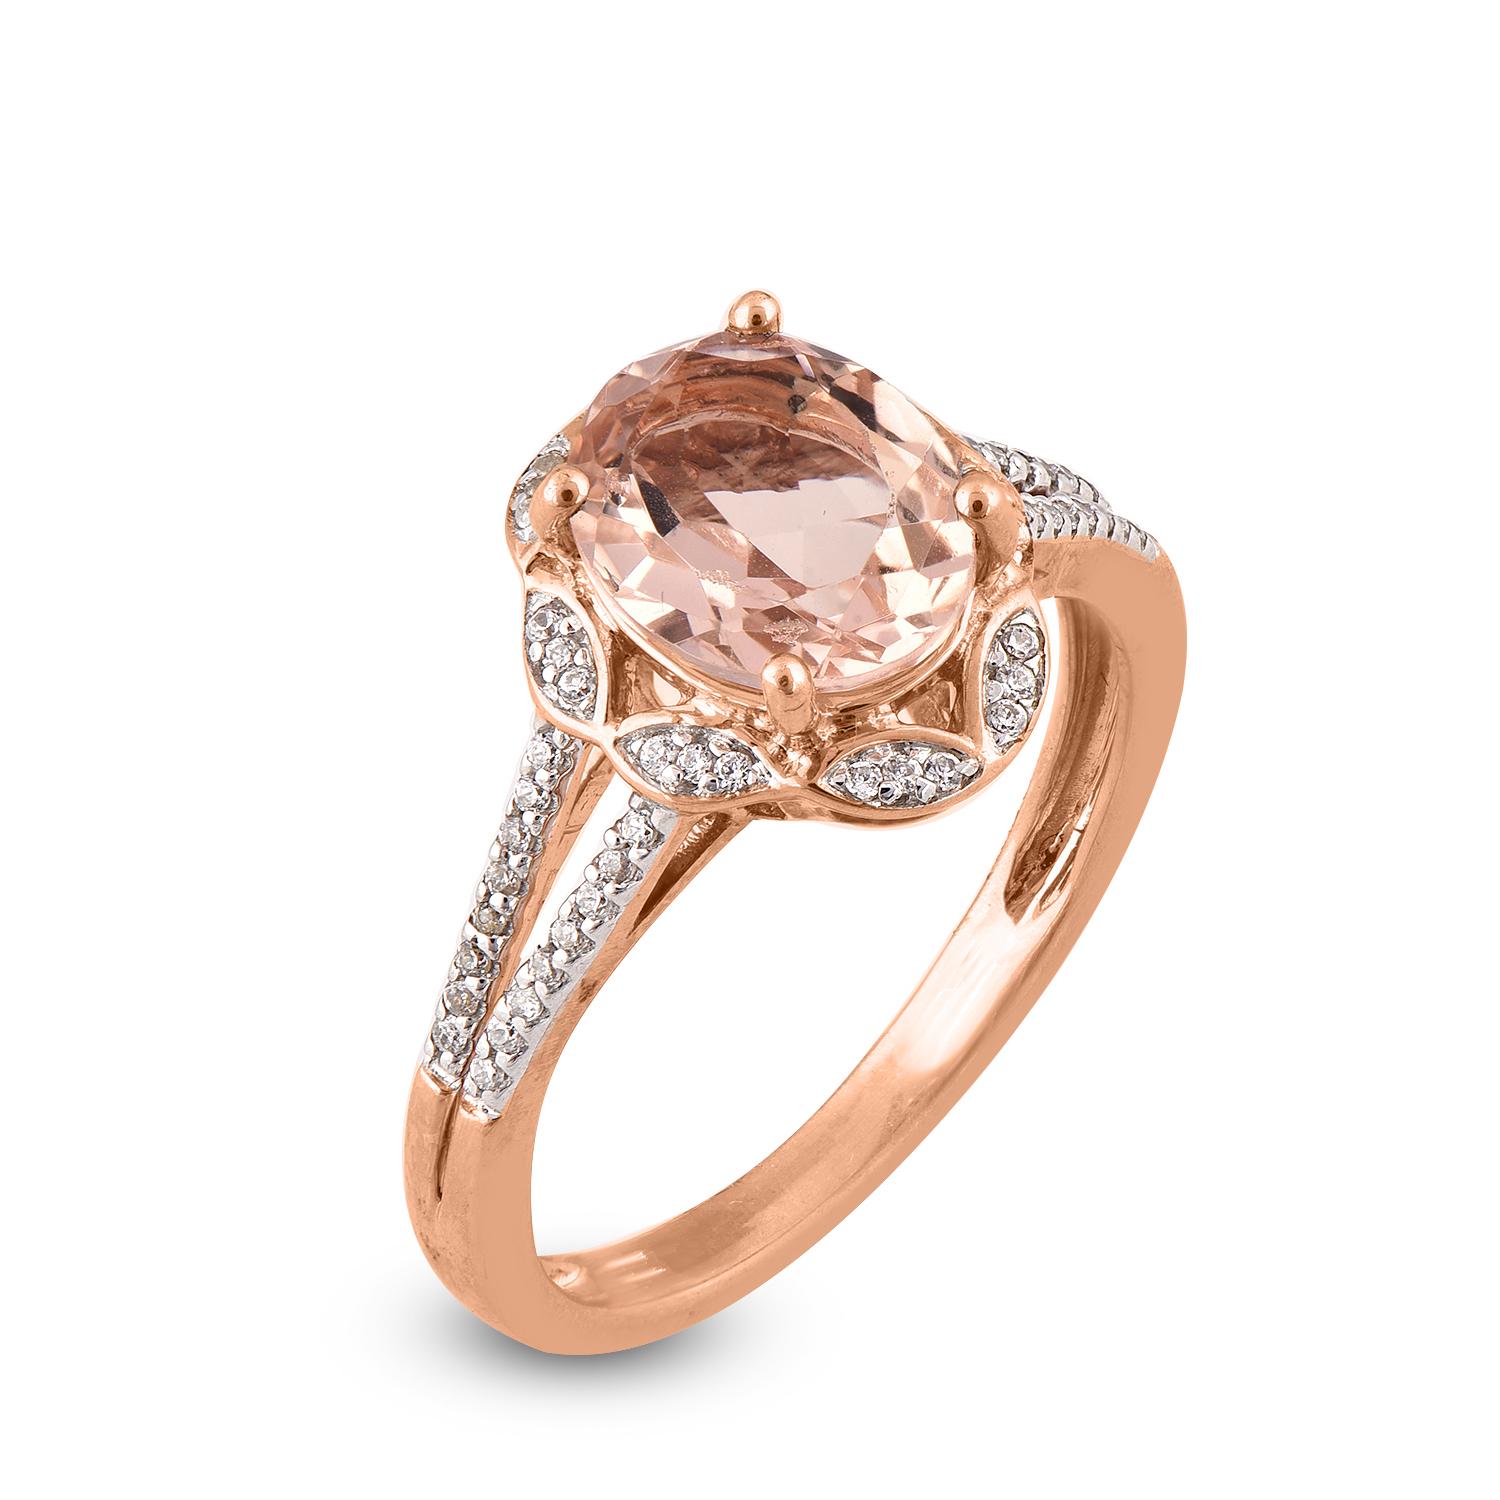 If you want to truly impress your lady with a pretty engagement ring, you’ll want to consider a morganite stone. Crafted in 14 Karat Rose gold and studded with 56 diamonds on frame and shank and centered 1 Oval cut morganite set in prong and pave